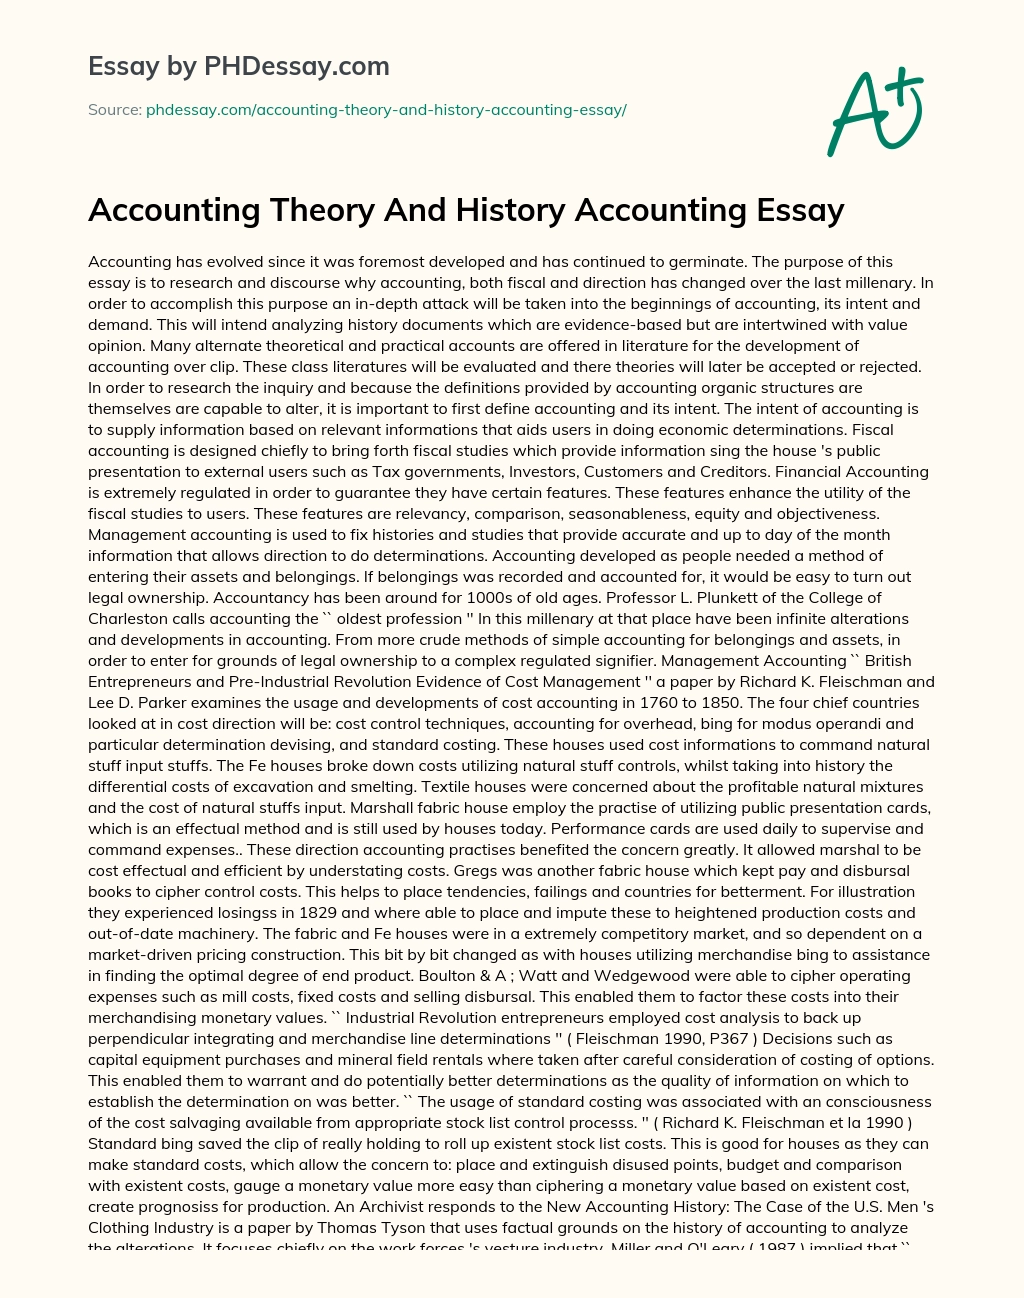 Accounting Theory And History Accounting Essay essay